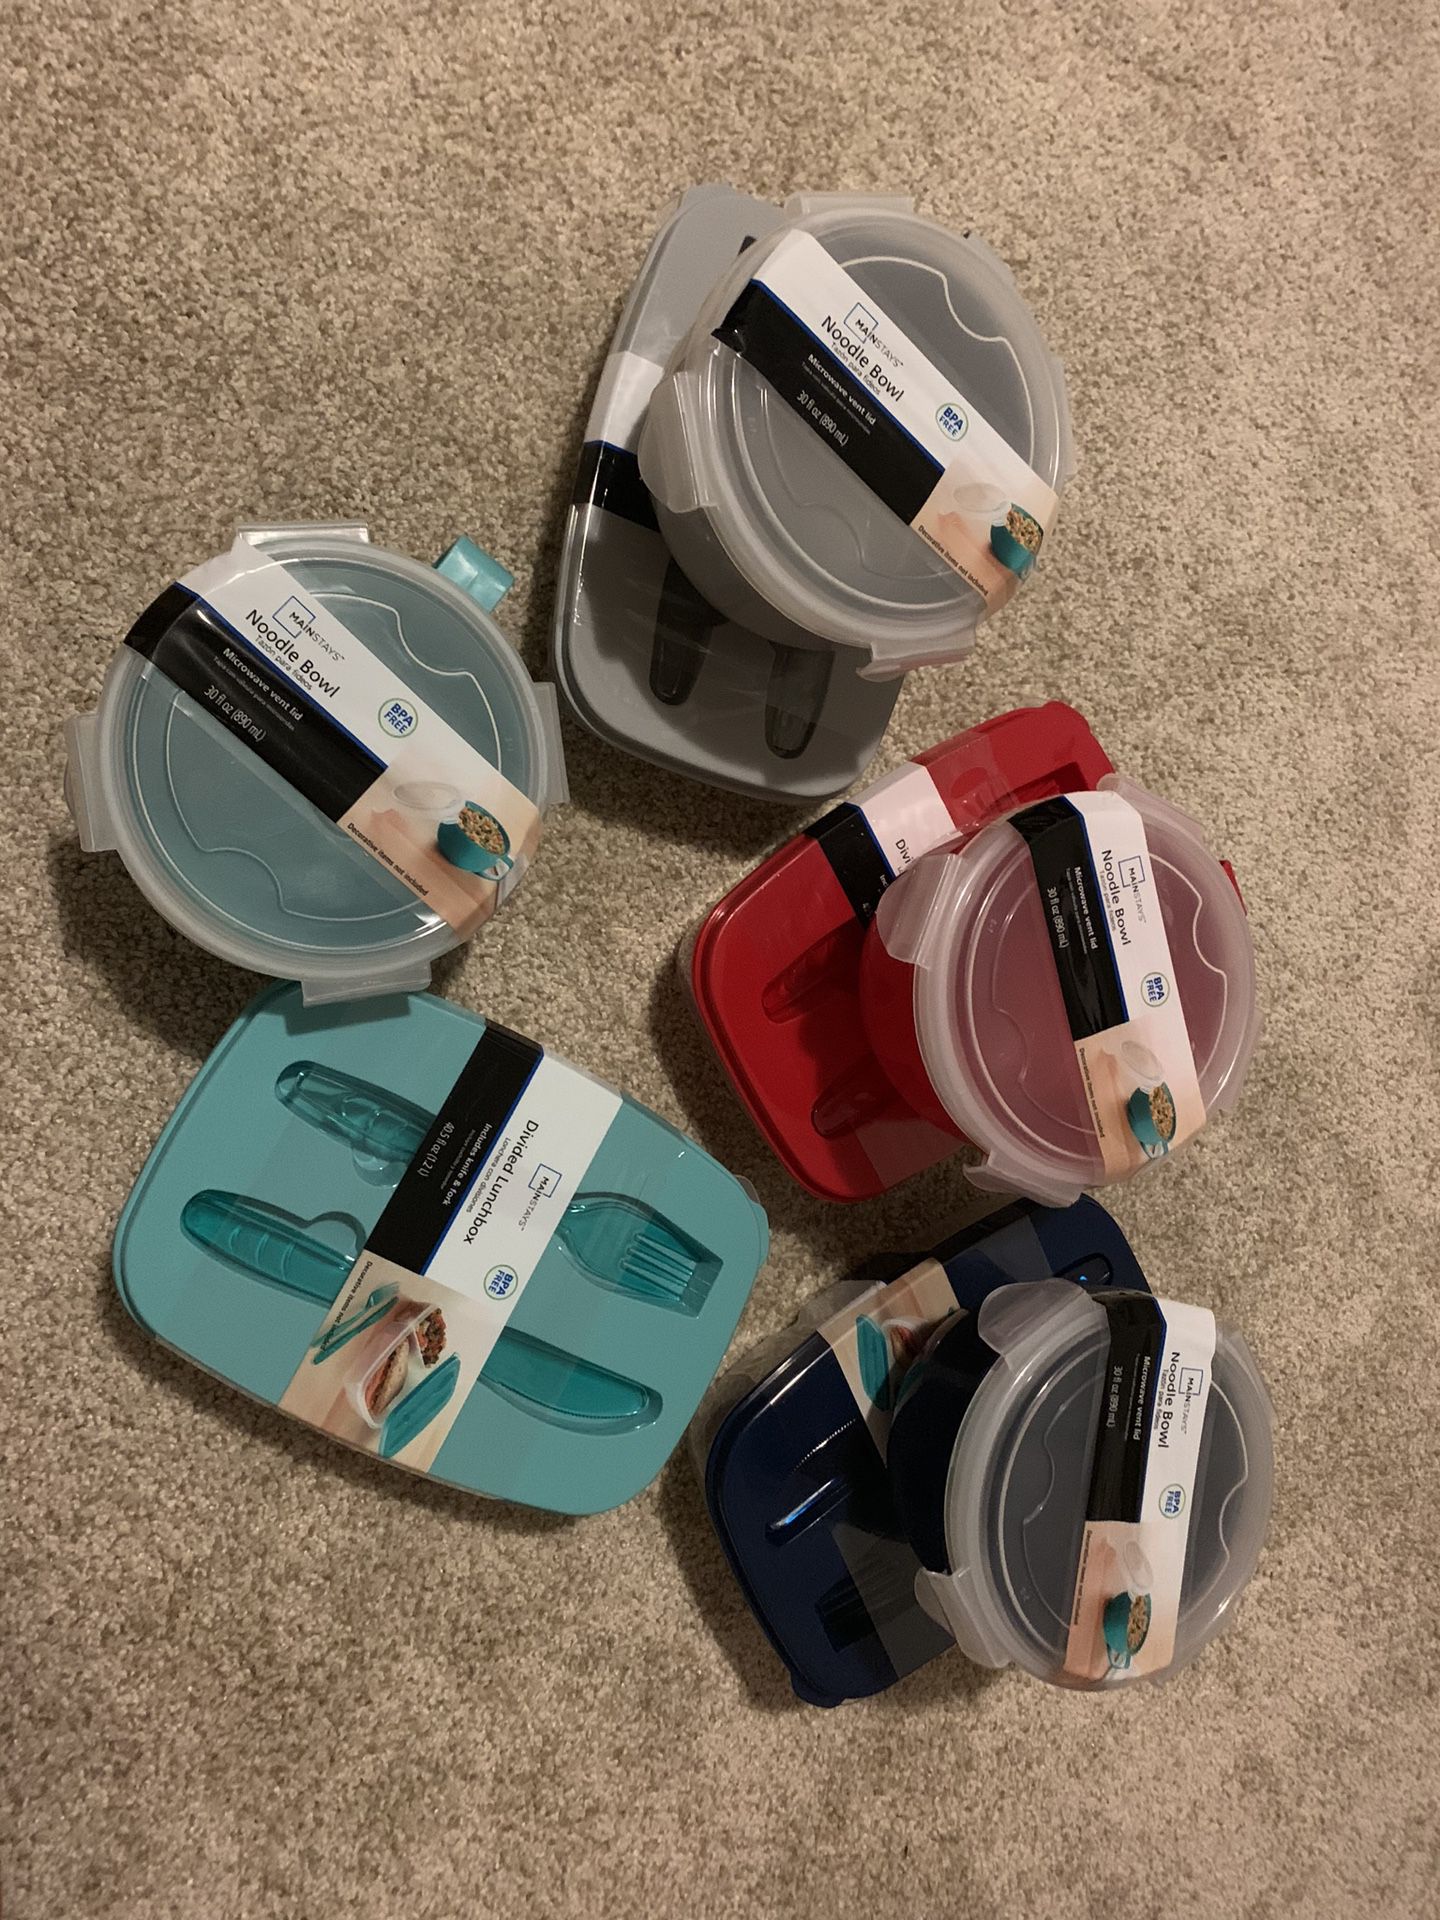 Unopened and New matching food storage containers